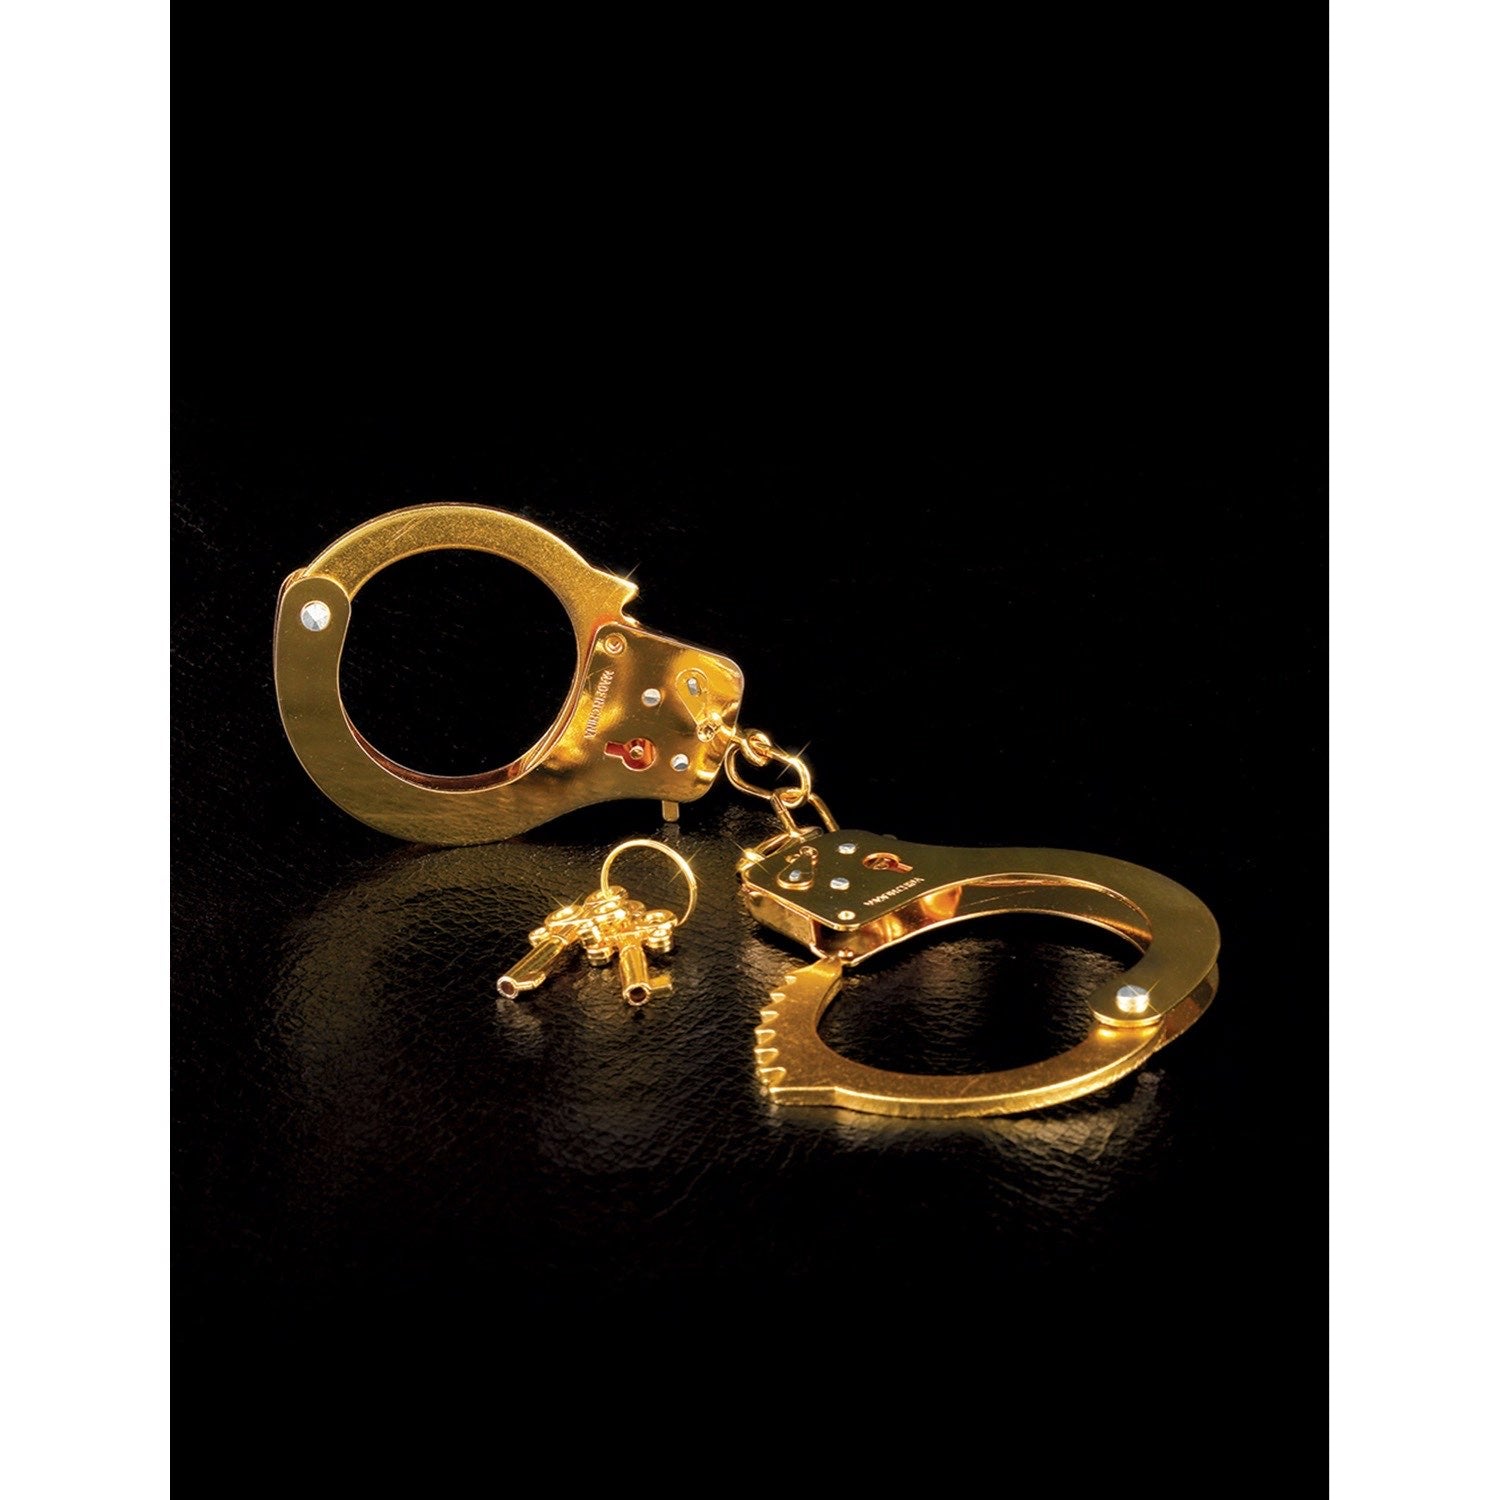 Fetish Fantasy Gold Metal Cuffs - Gold Restraints by Pipedream